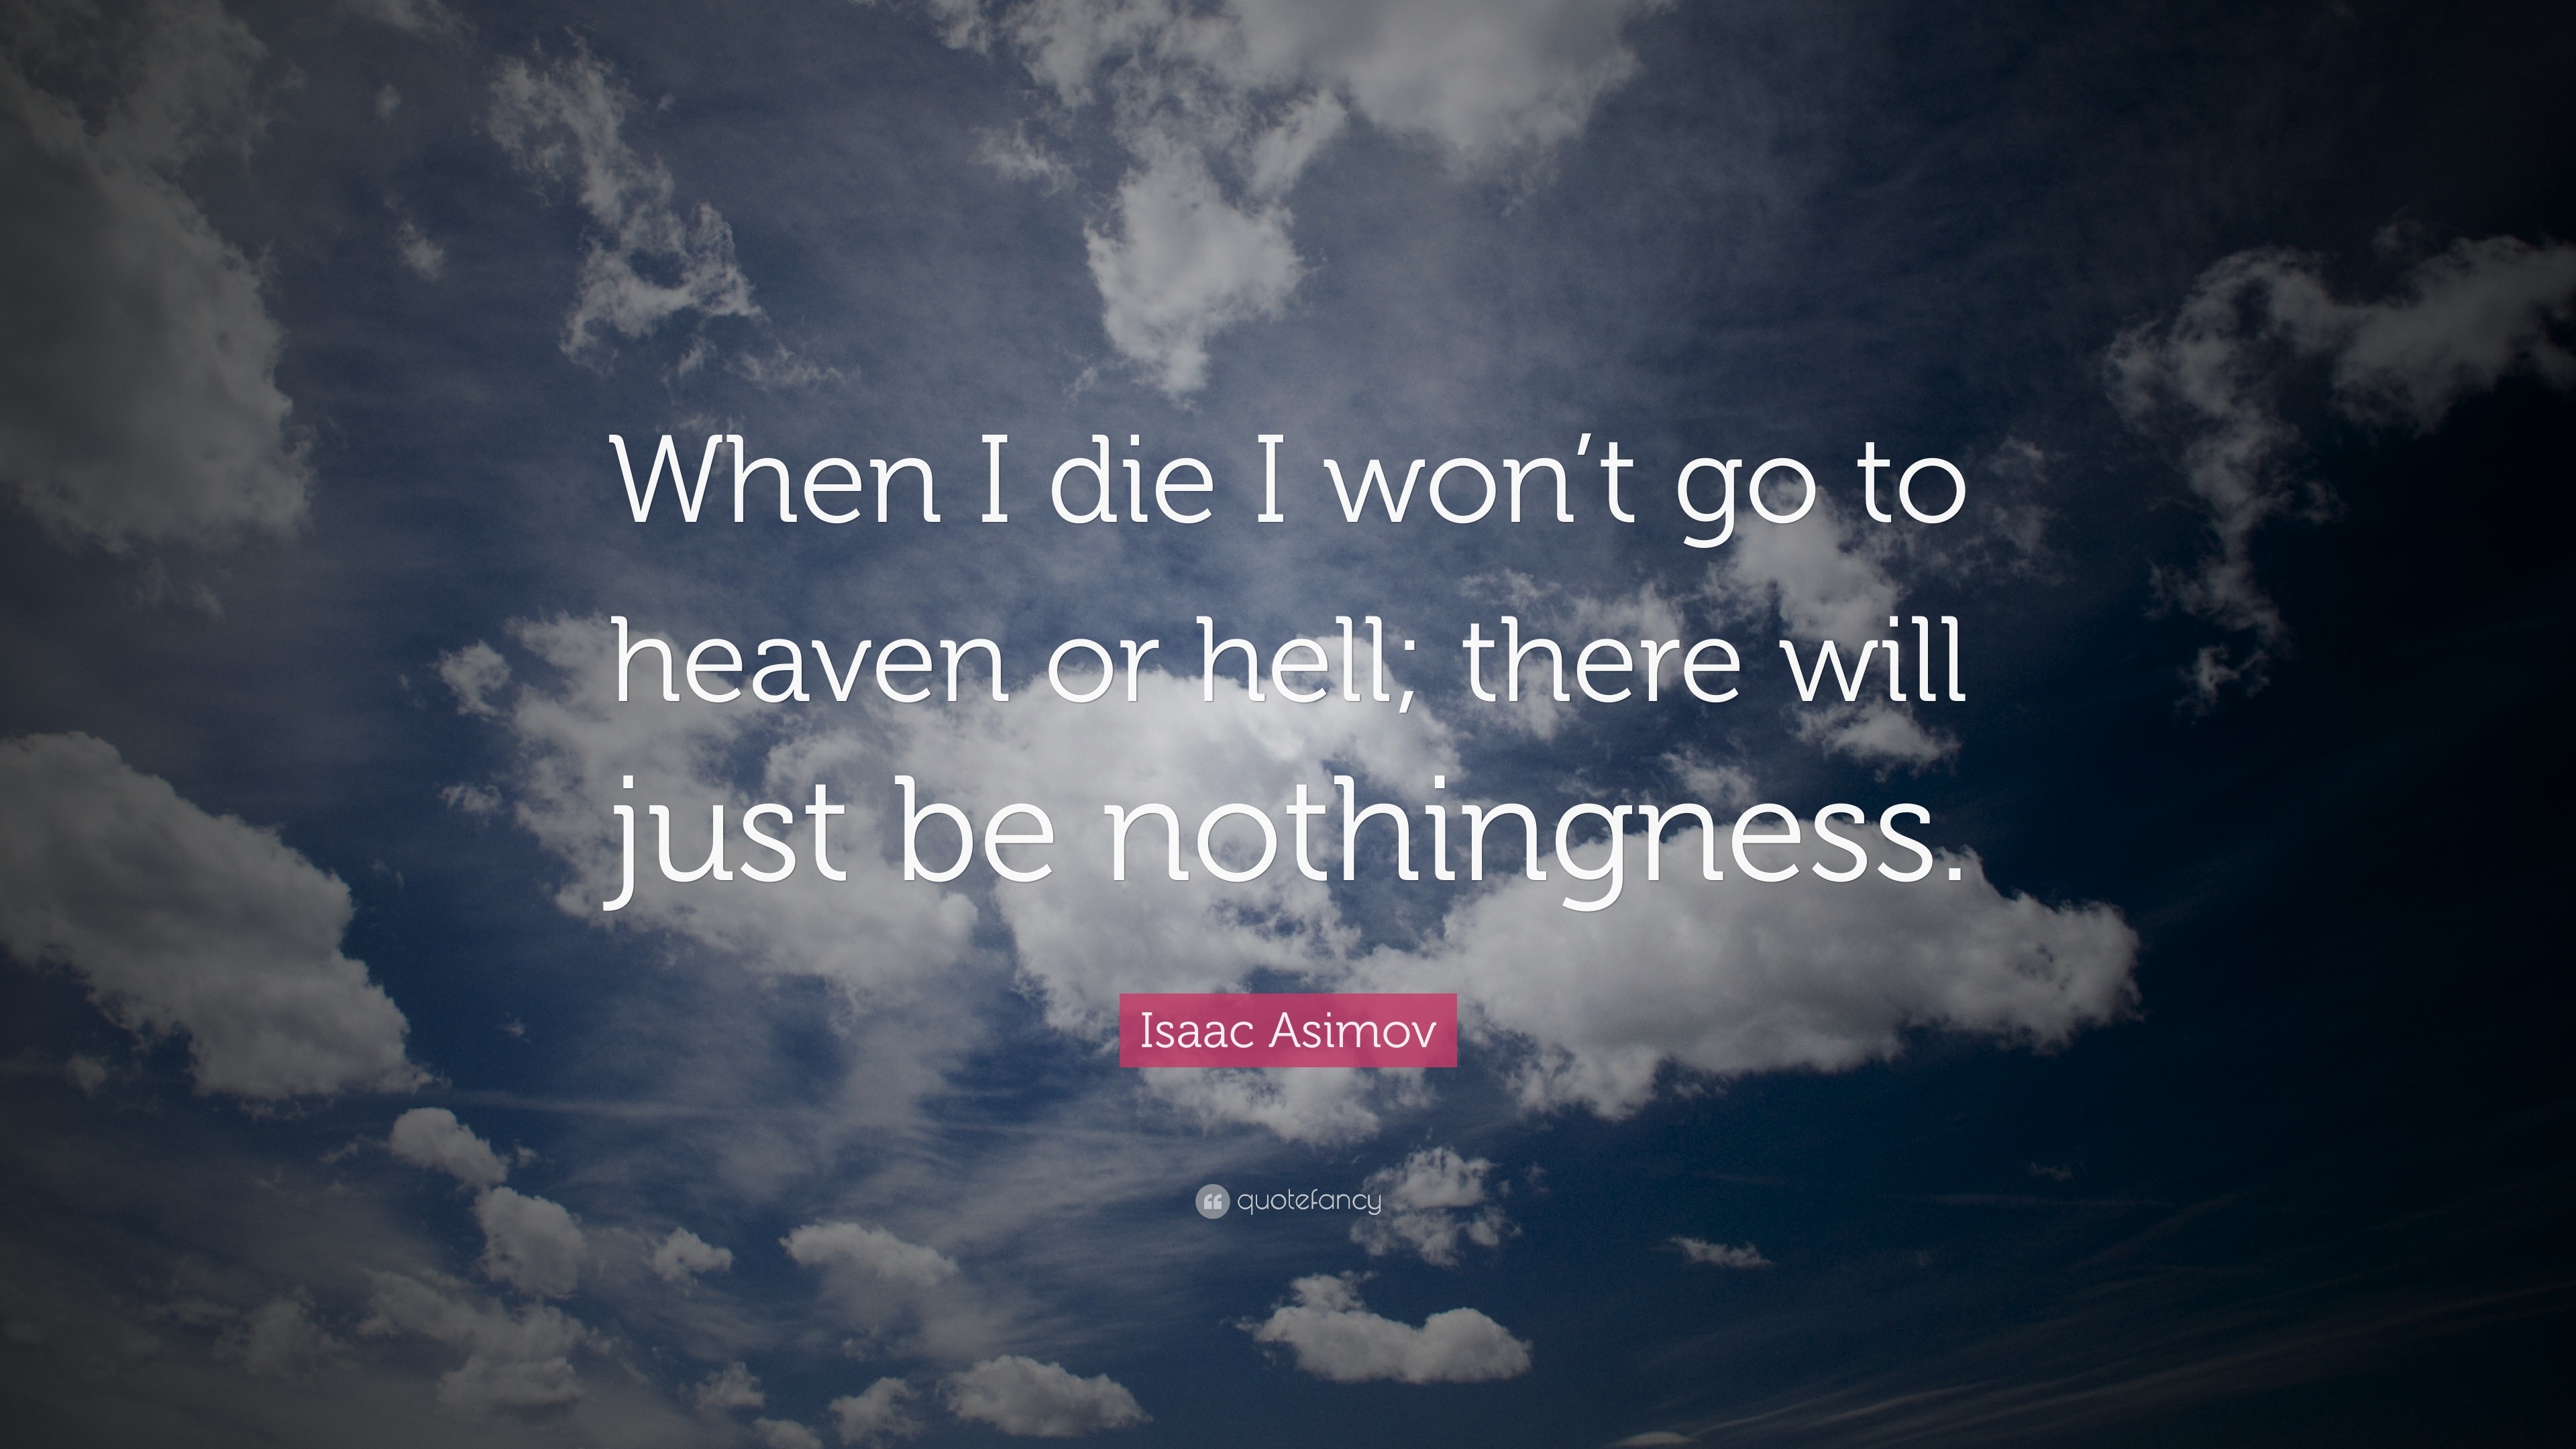 Isaac Asimov Quote When I Die I Won T Go To Heaven Or Hell There Will Just Be Nothingness 7 Wallpapers Quotefancy